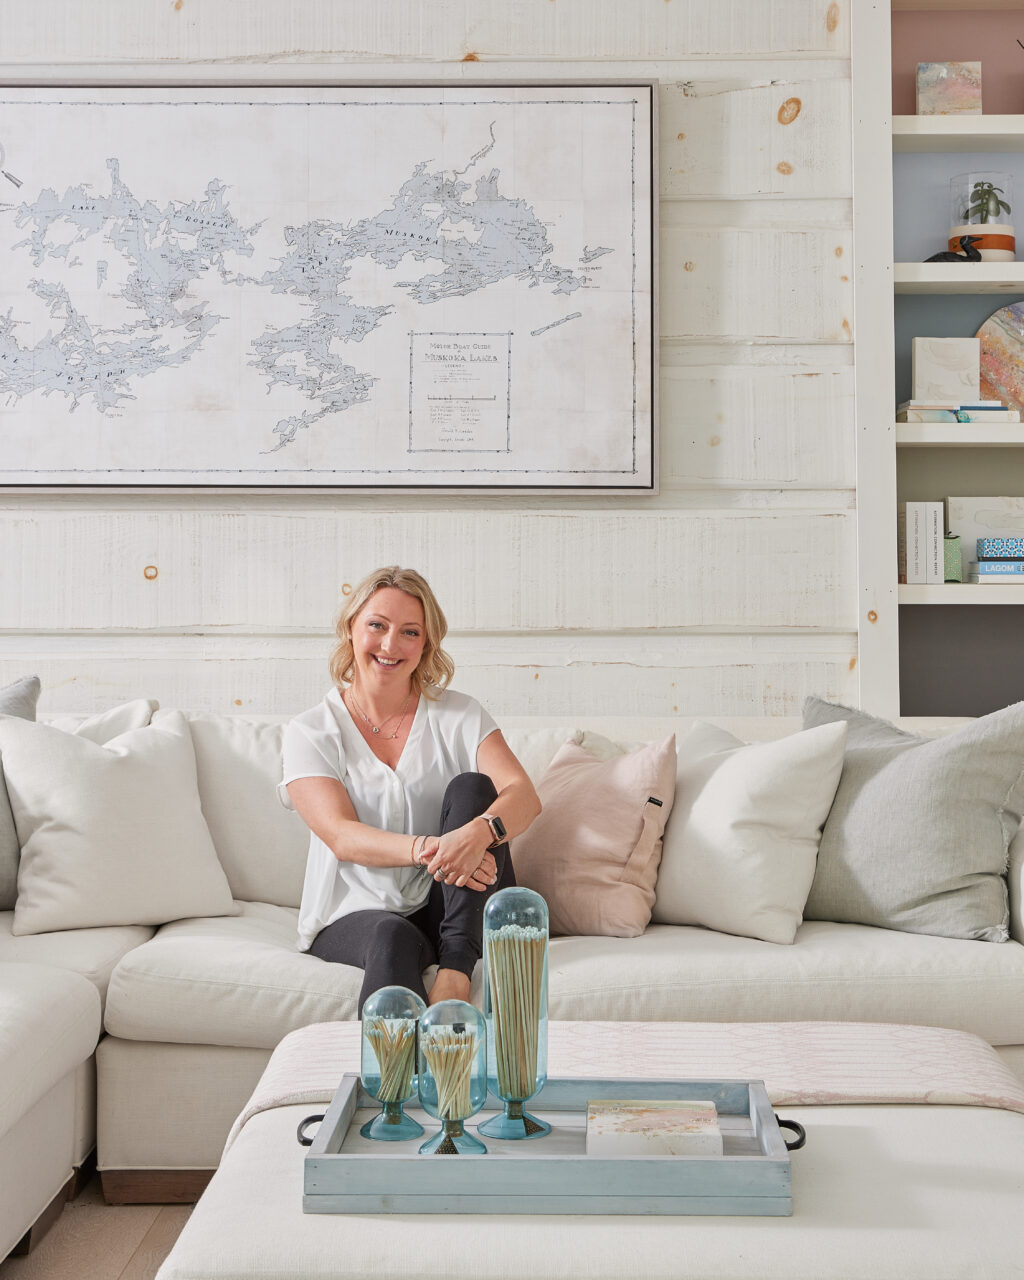 The Cottage Makeover Series - Jennylyn sitting on white coach in front of white washed wood panel walls with a map of Muskoka Lakes on the wall